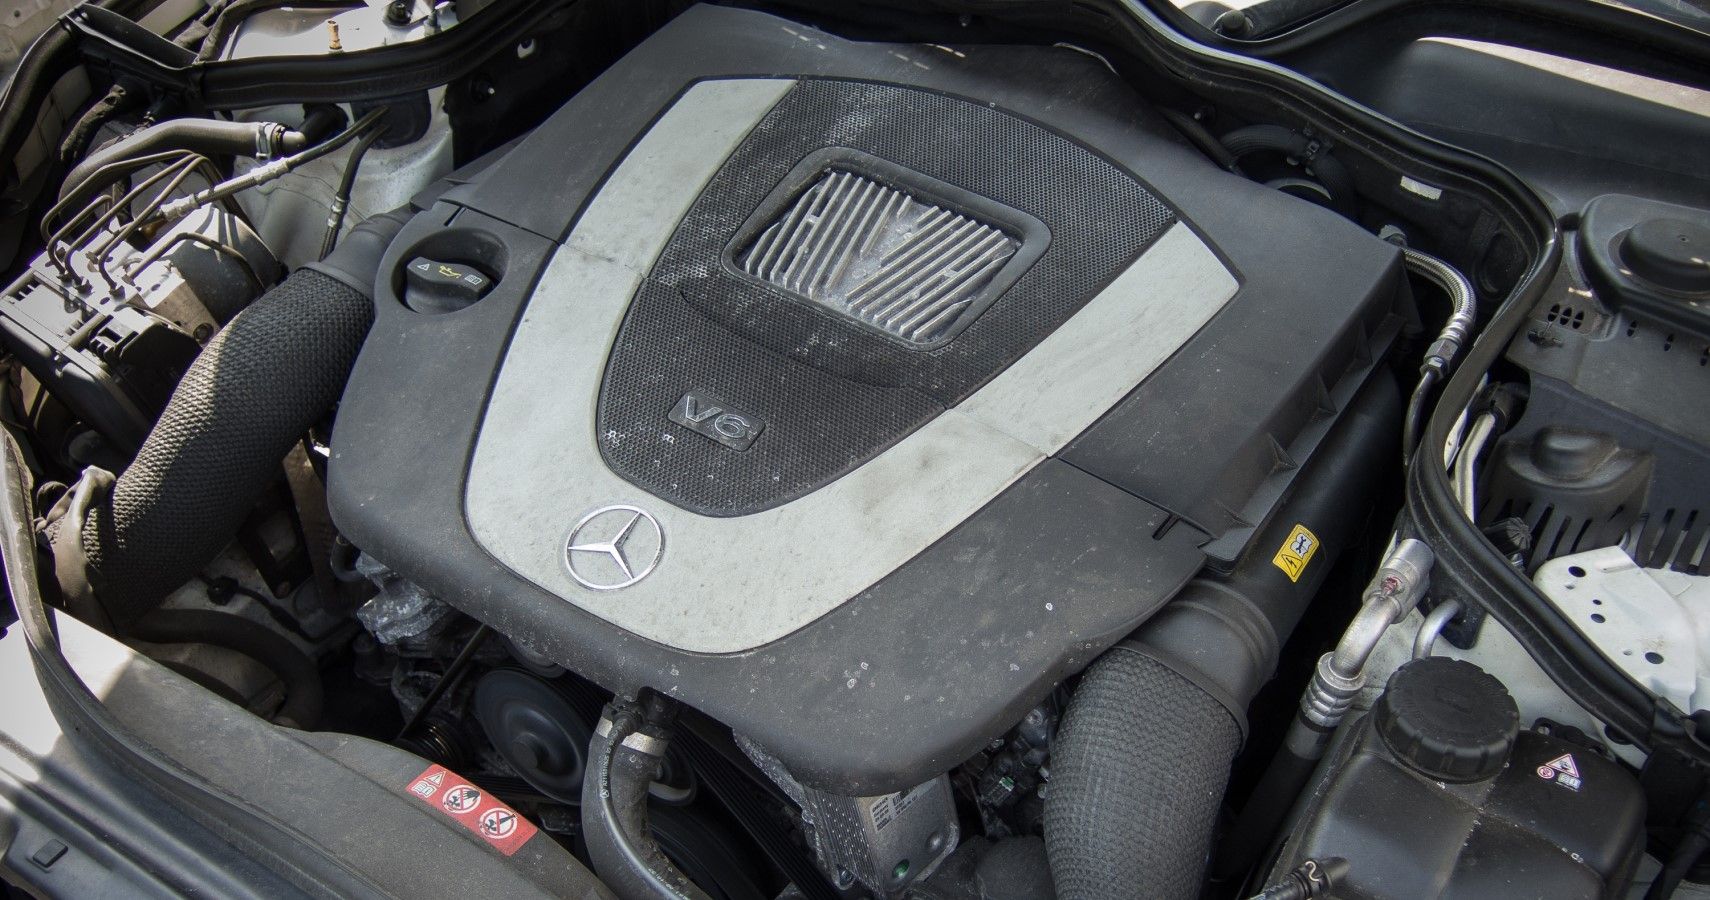 Mercedes Benz C-Class (W204) 2007 - 2014 Training Manual - OM642 Features -  Engine